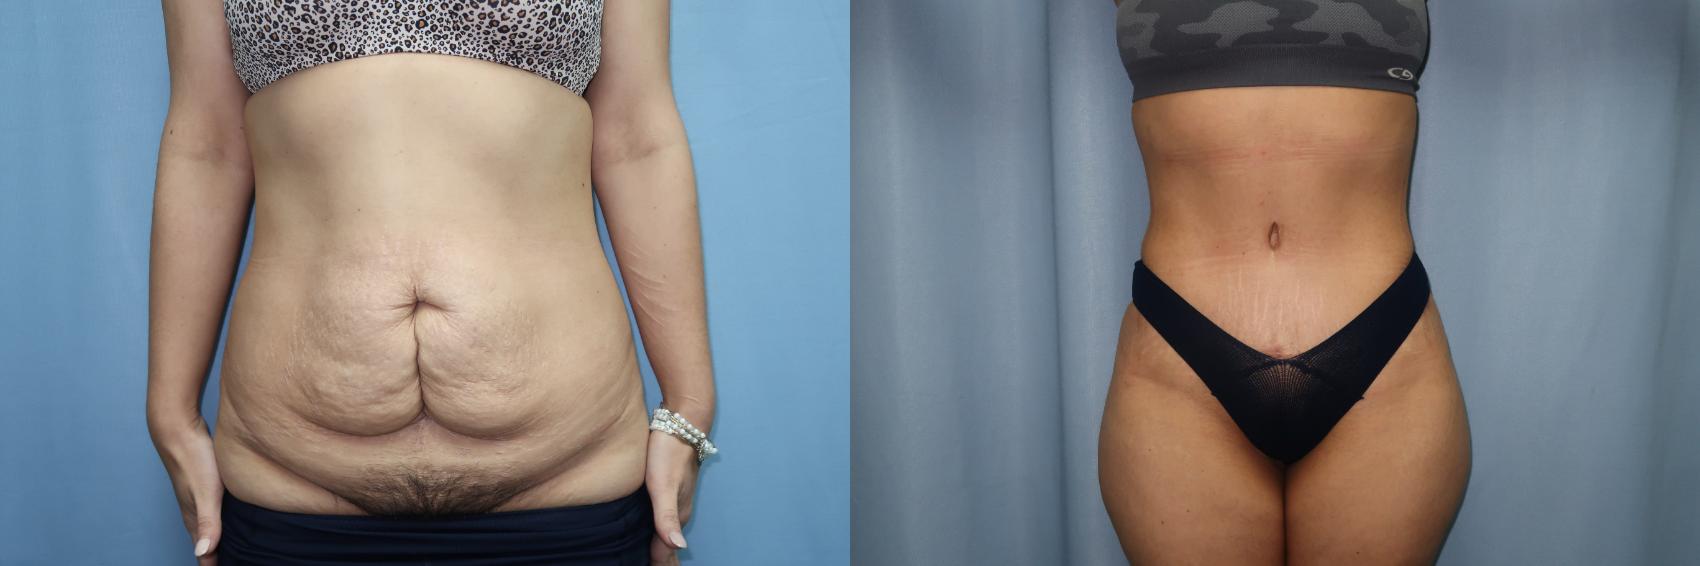 Abdominoplasty/Tummy Tuck Before & After Photo | Marietta, GA | Plastic Surgery Center of the South